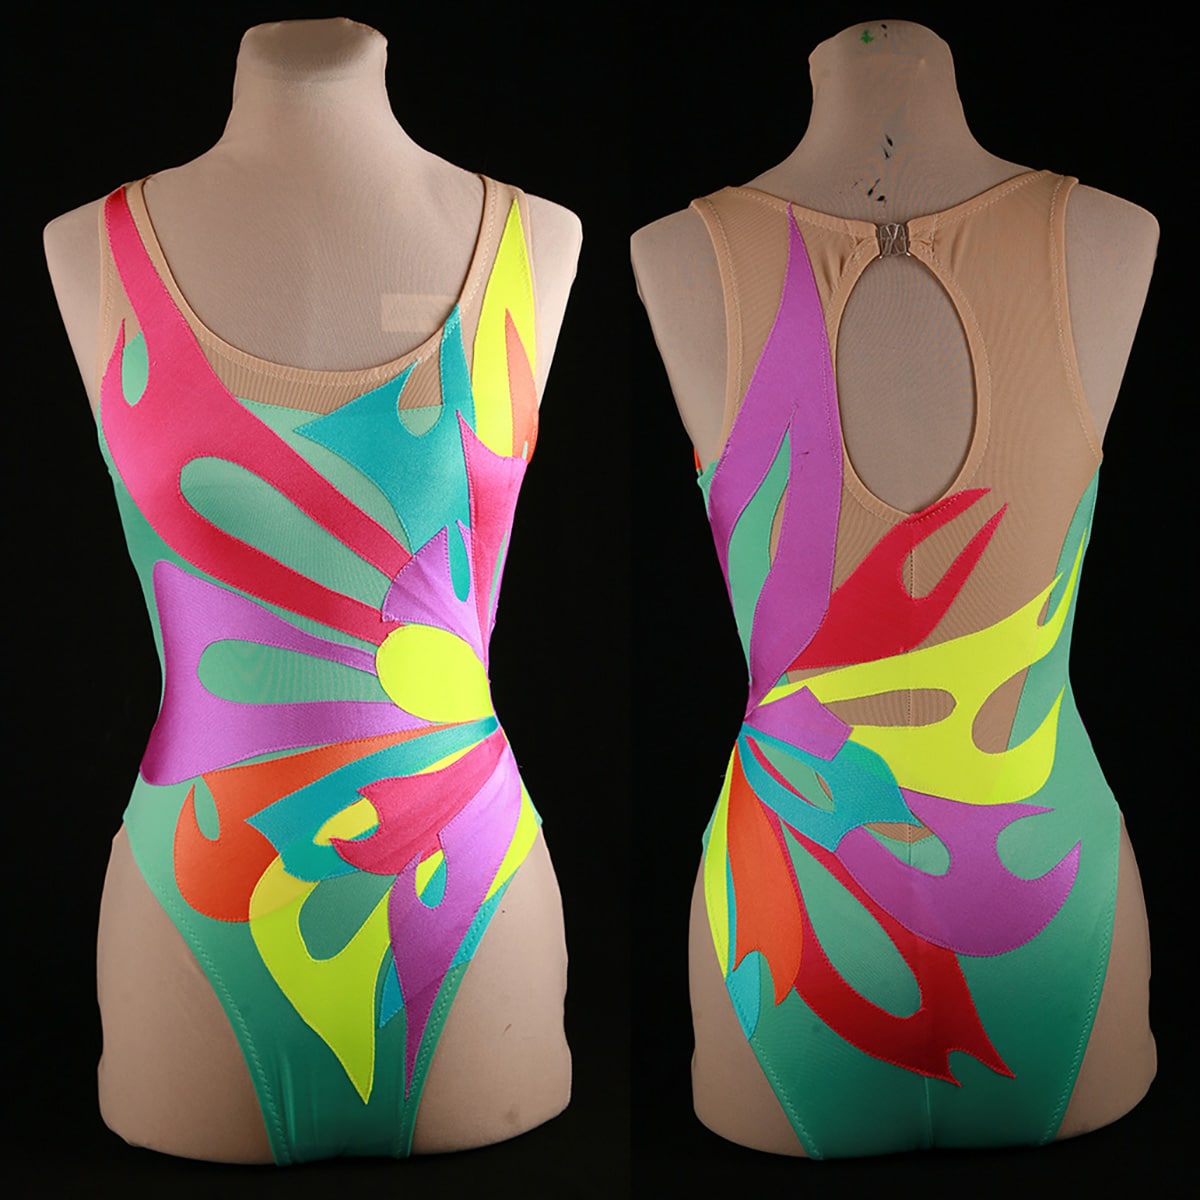 The frotn and black views of a colourful synchro swimsuit.